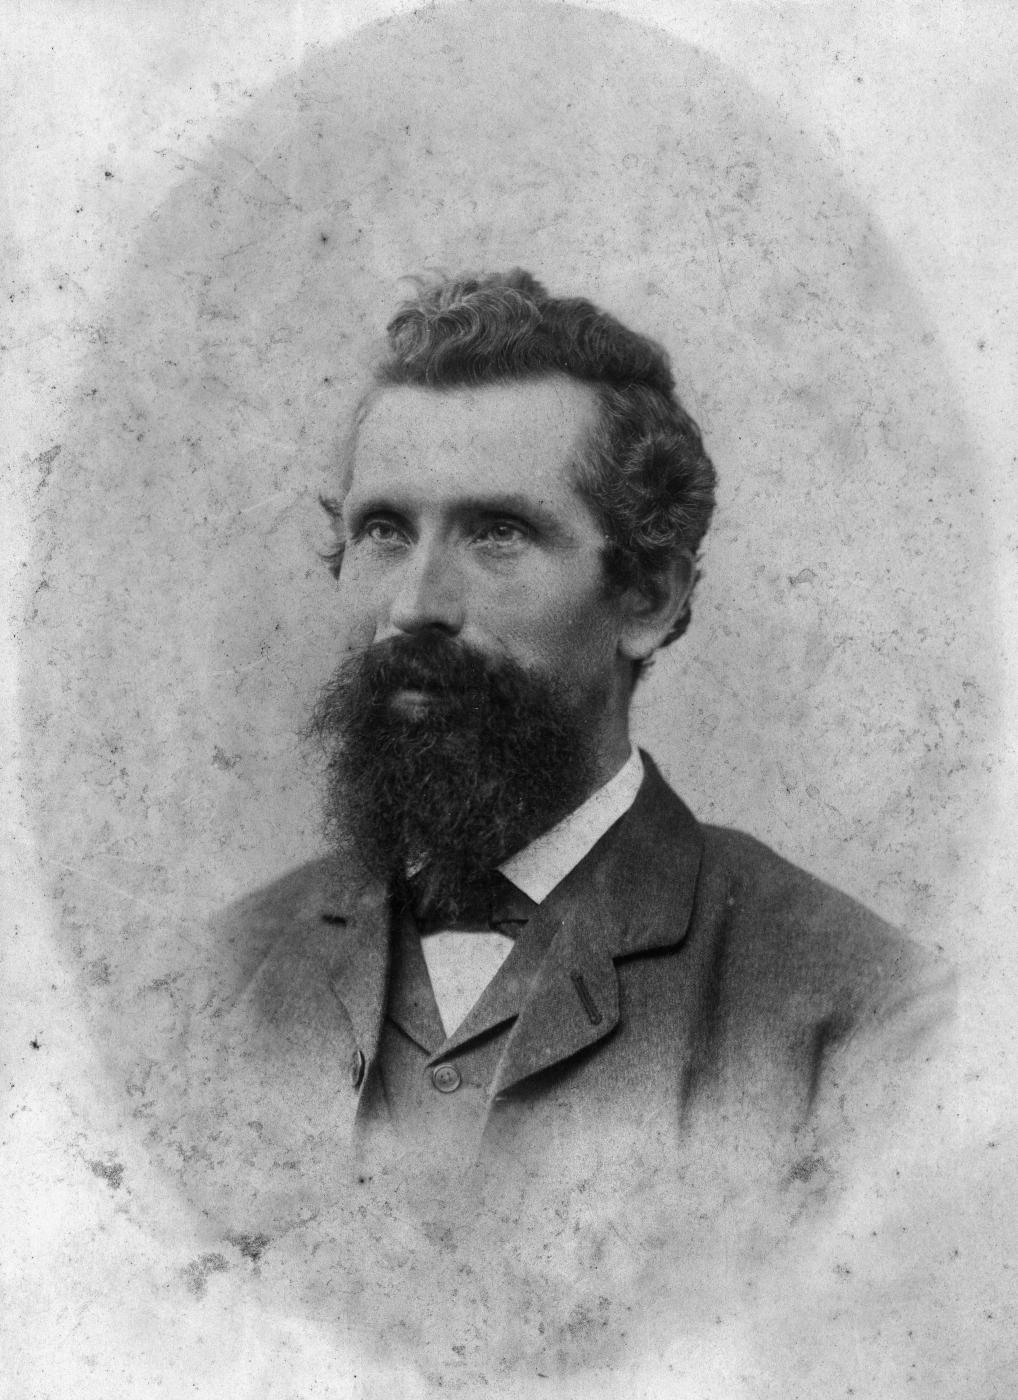 Thomas Glassey, the first Queensland Labor politician, and founding member of the Labor Party